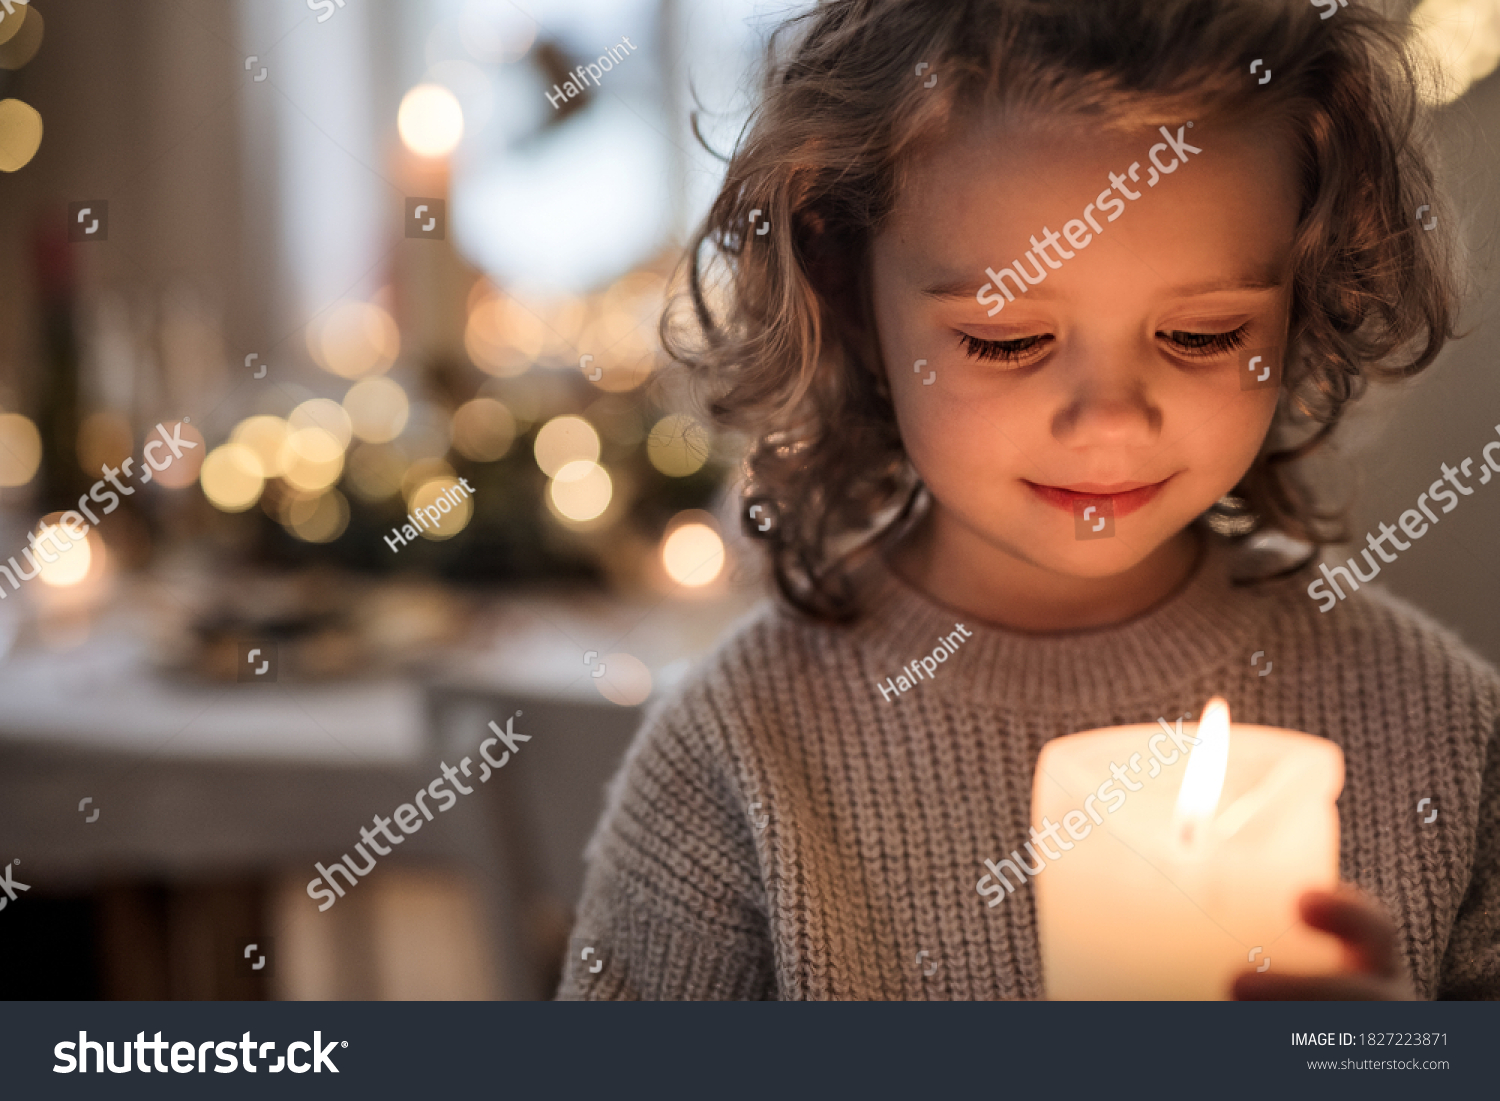 Cheerful small girl indoors at home at Christmas, holding candle. #1827223871